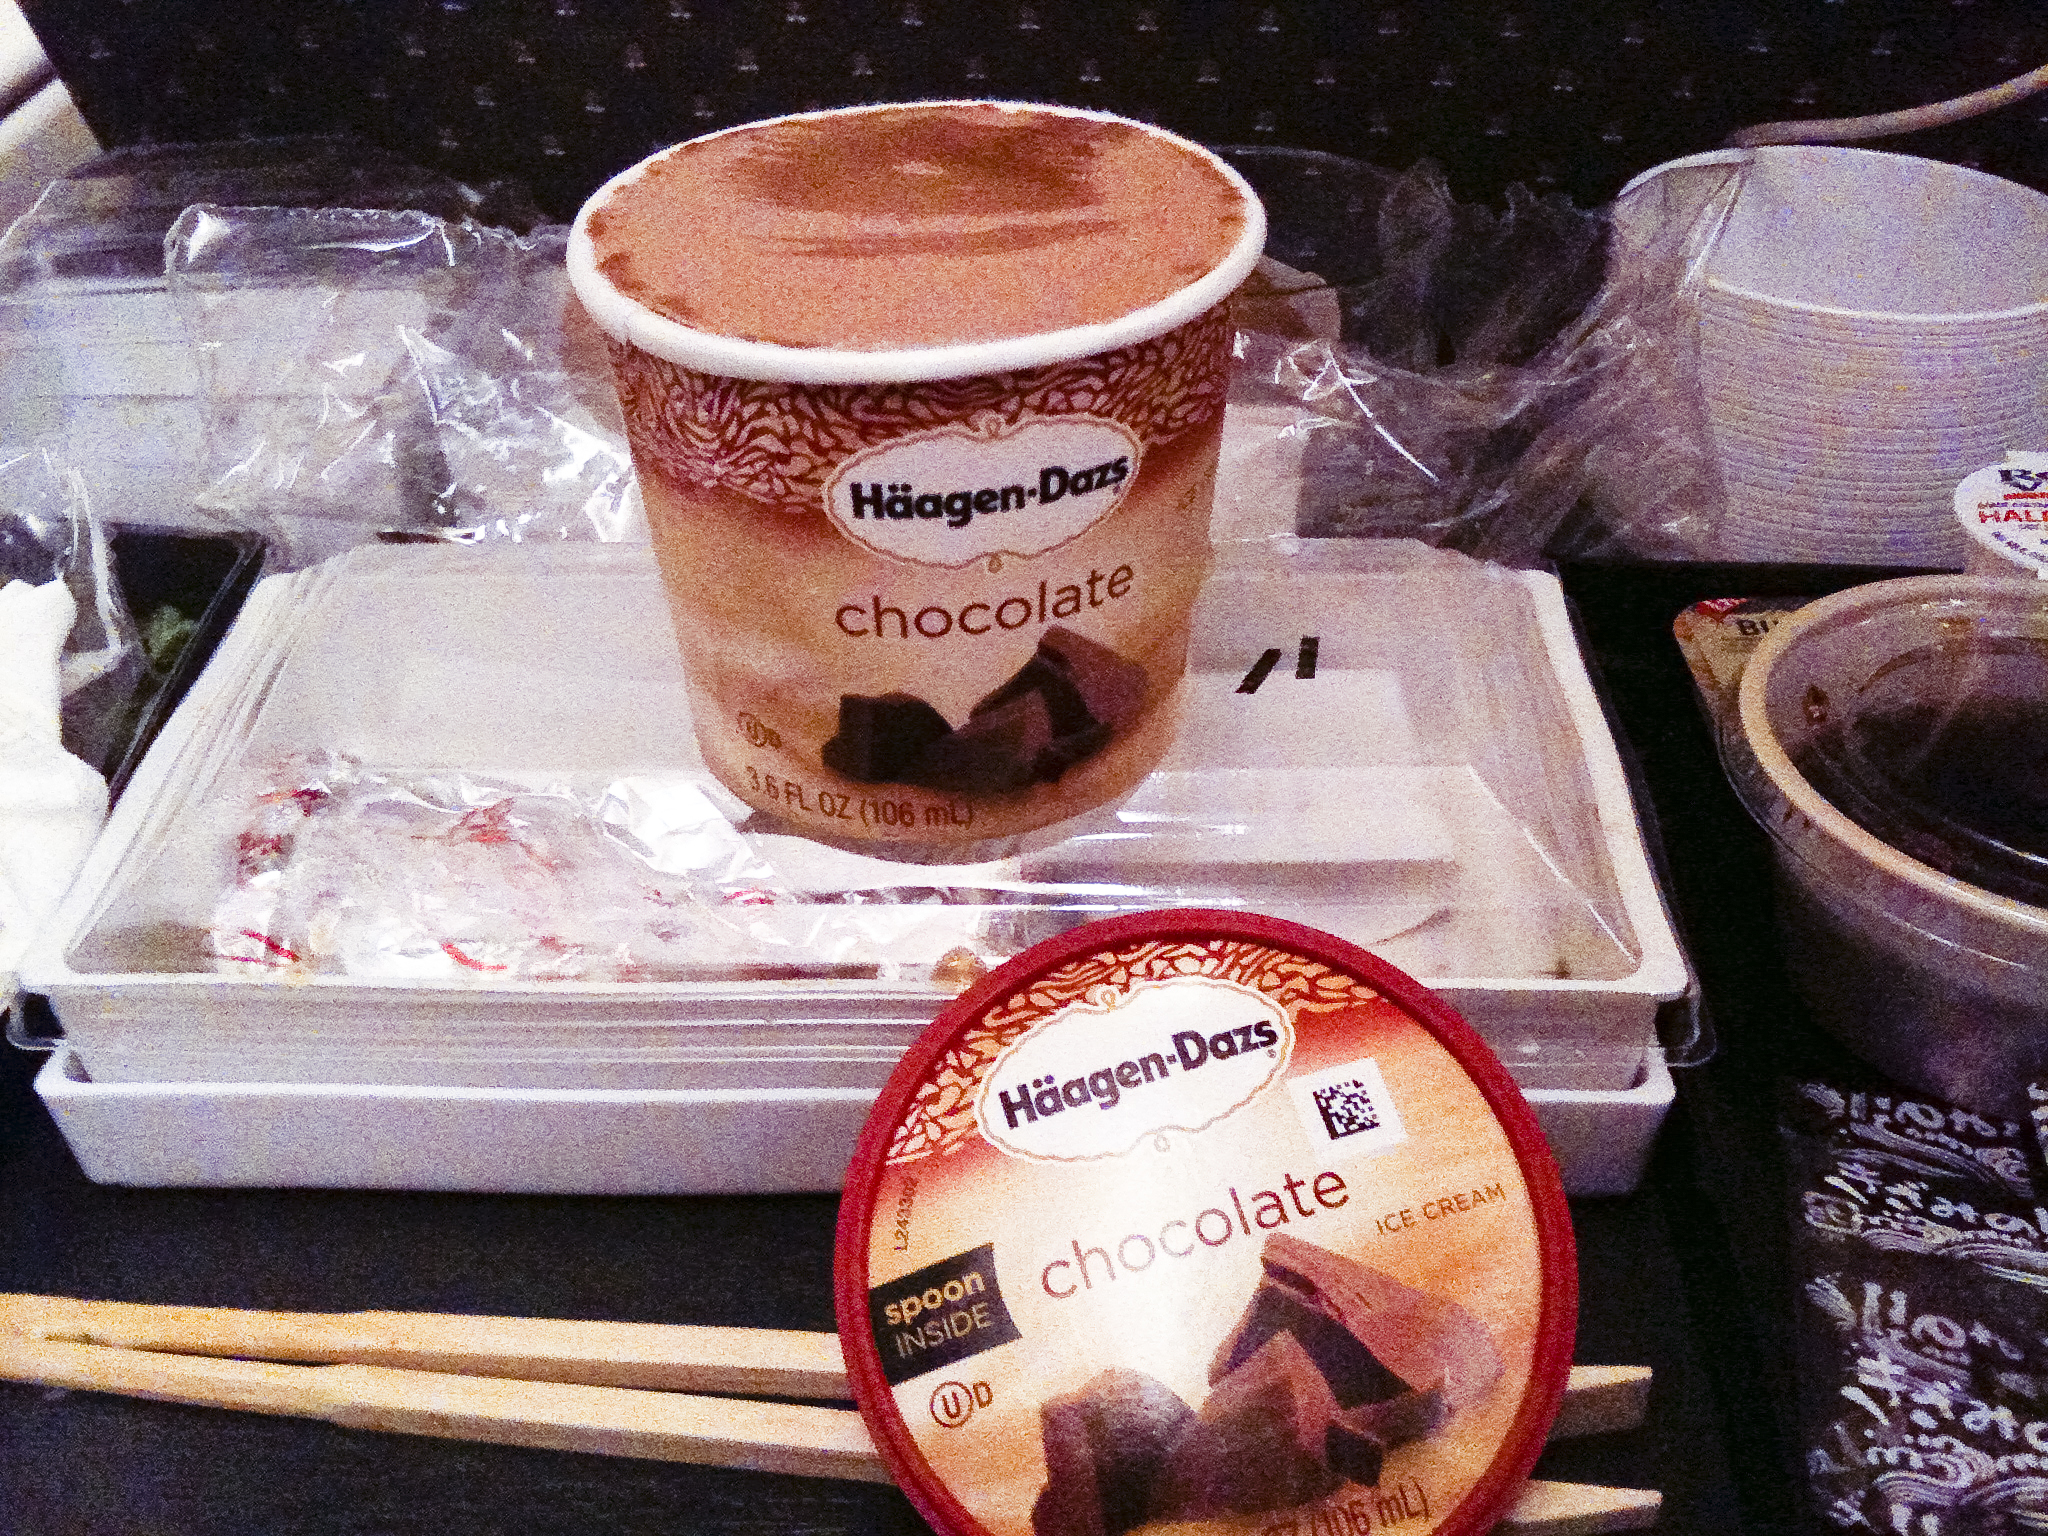 Haagen Daz chocolate ice cream for dessert at the Singapore Airline plane from USA to Singapore.